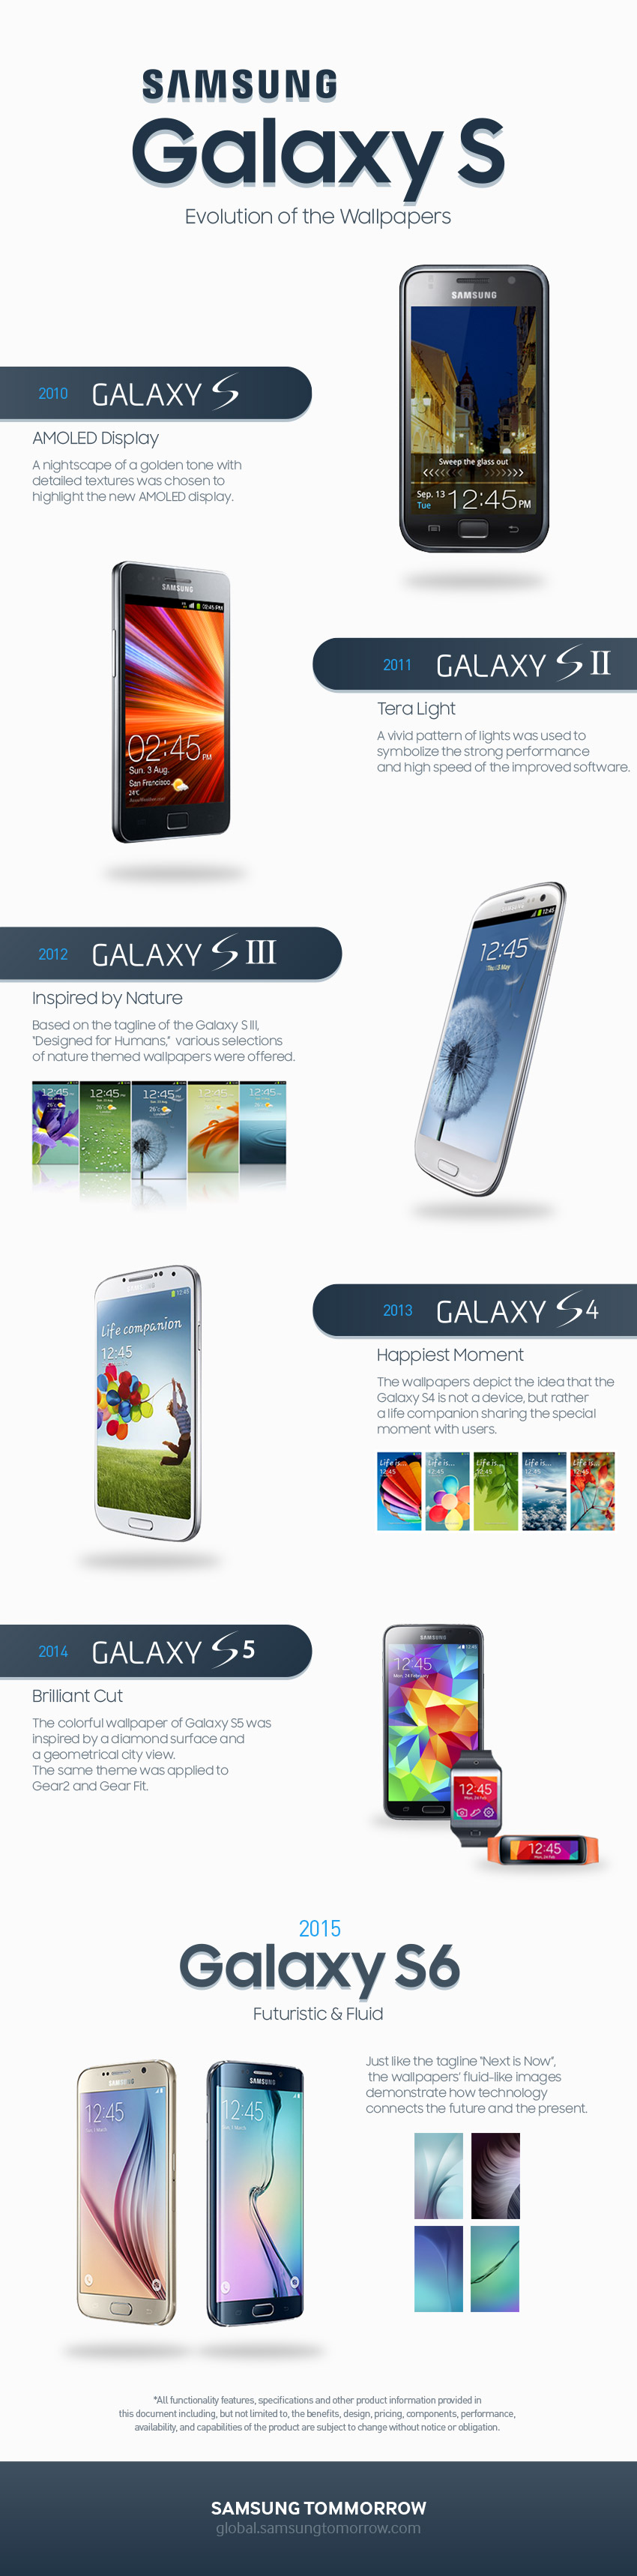 Infographic the iconic wallpapers of the galaxy s series â global room